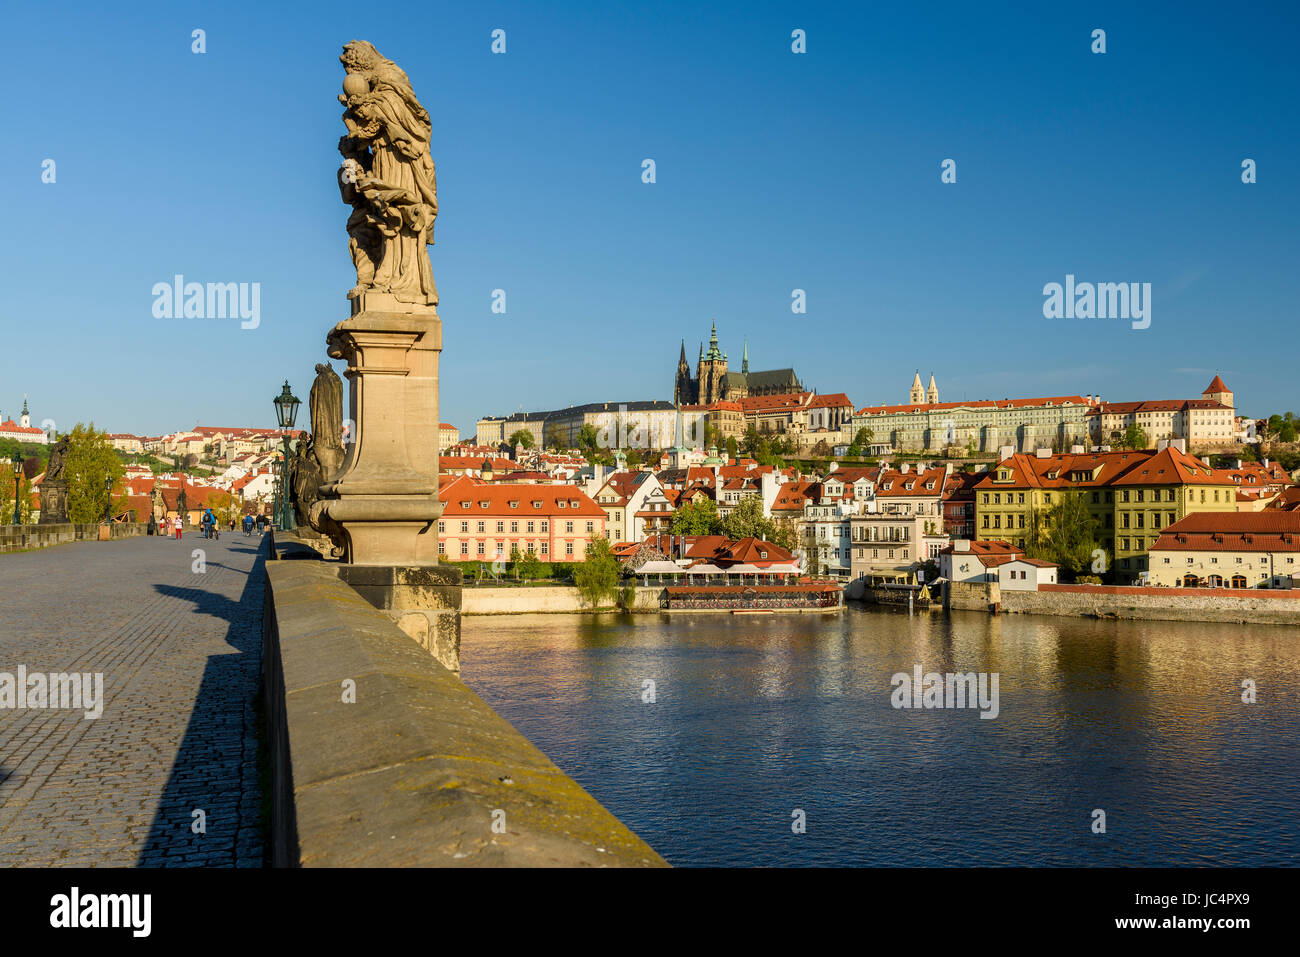 View of St. Vitus Cathedral and Prague Castle complex from Charles Bridge, Prague, Bohemia, Czech Republic Stock Photo